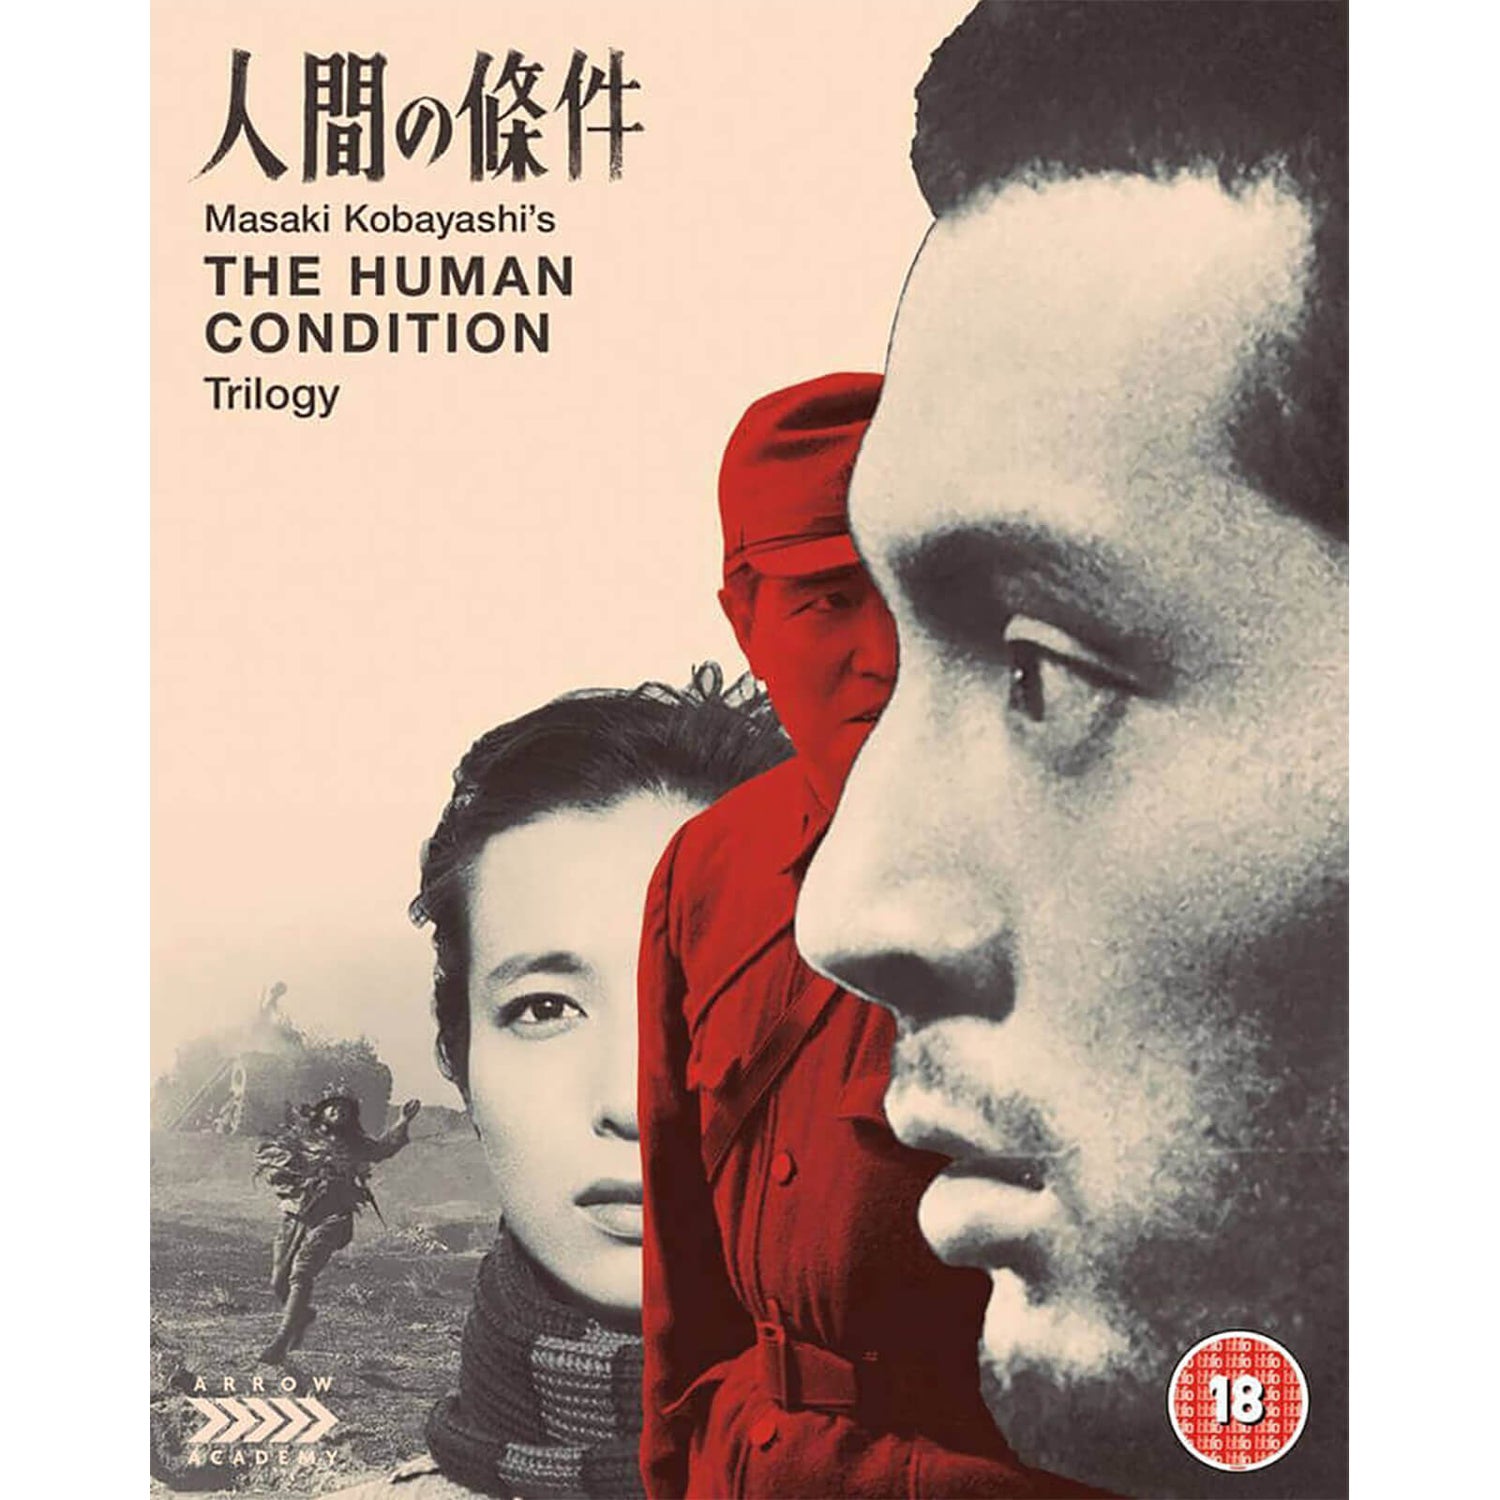 The Human Condition Trilogy - Dual Format (Includes DVD)